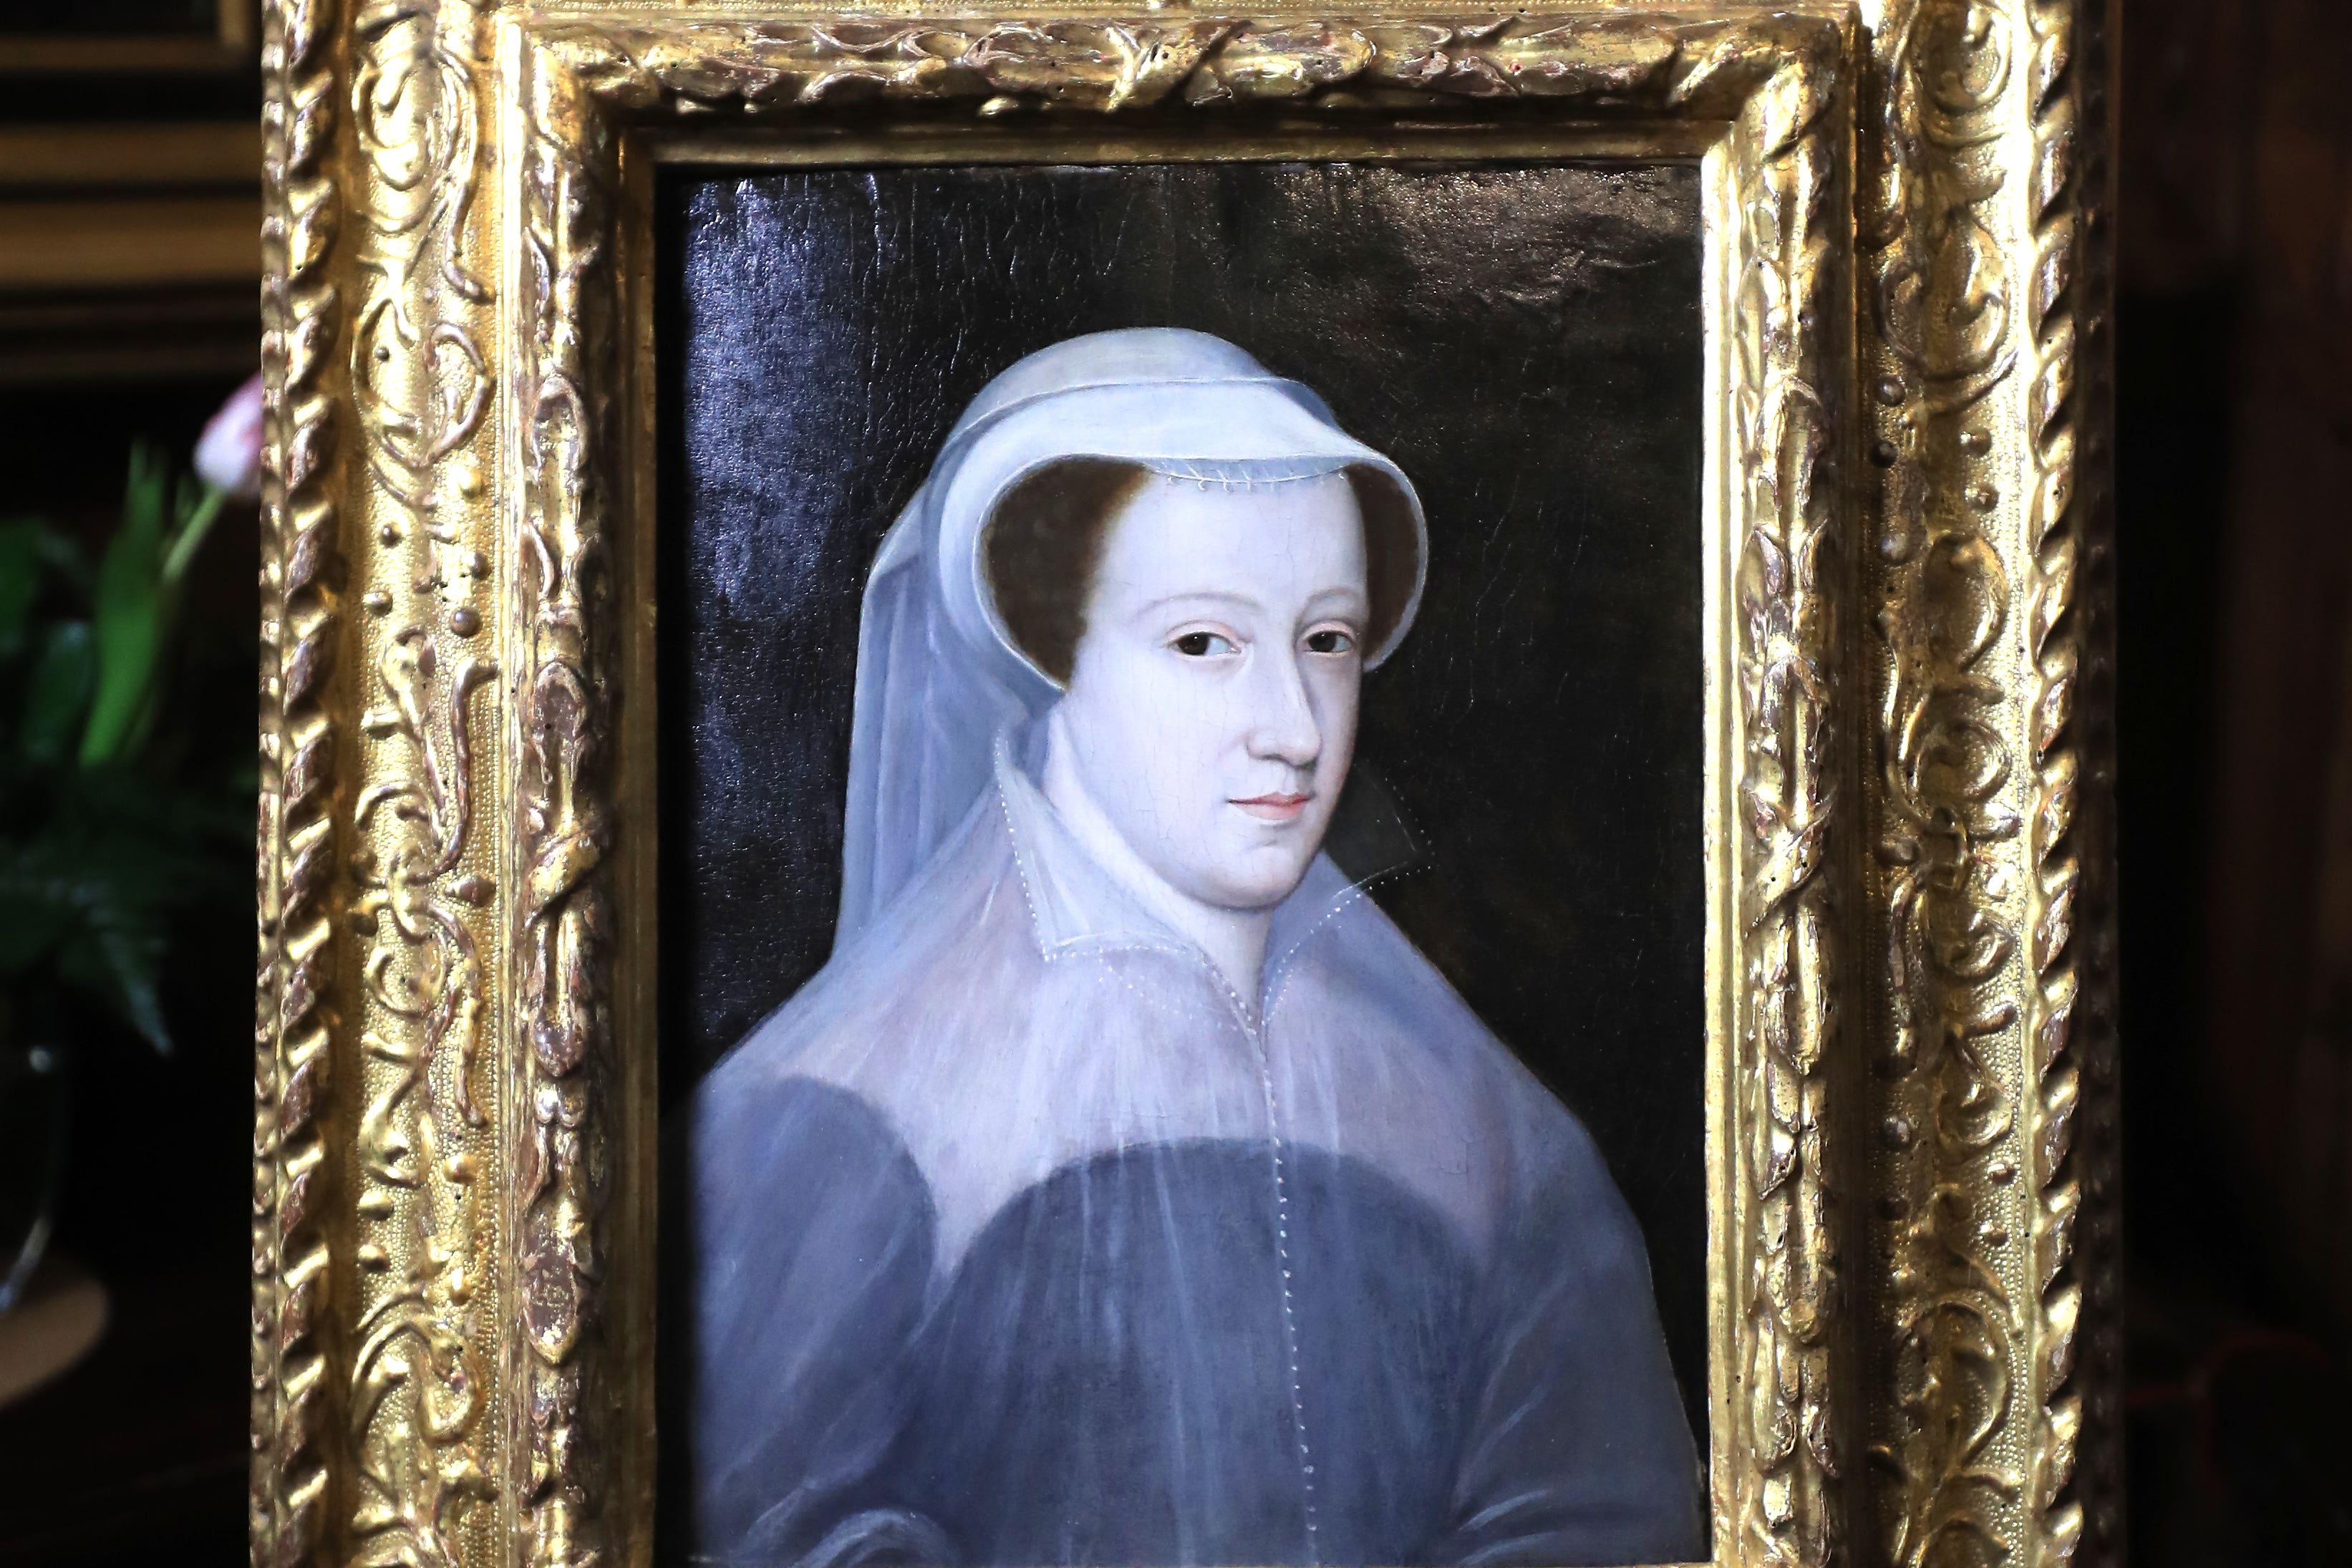 Codebreakers have cracked secrets of Mary Queen of Scots’ lost letters (Gareth Fuller/PA)